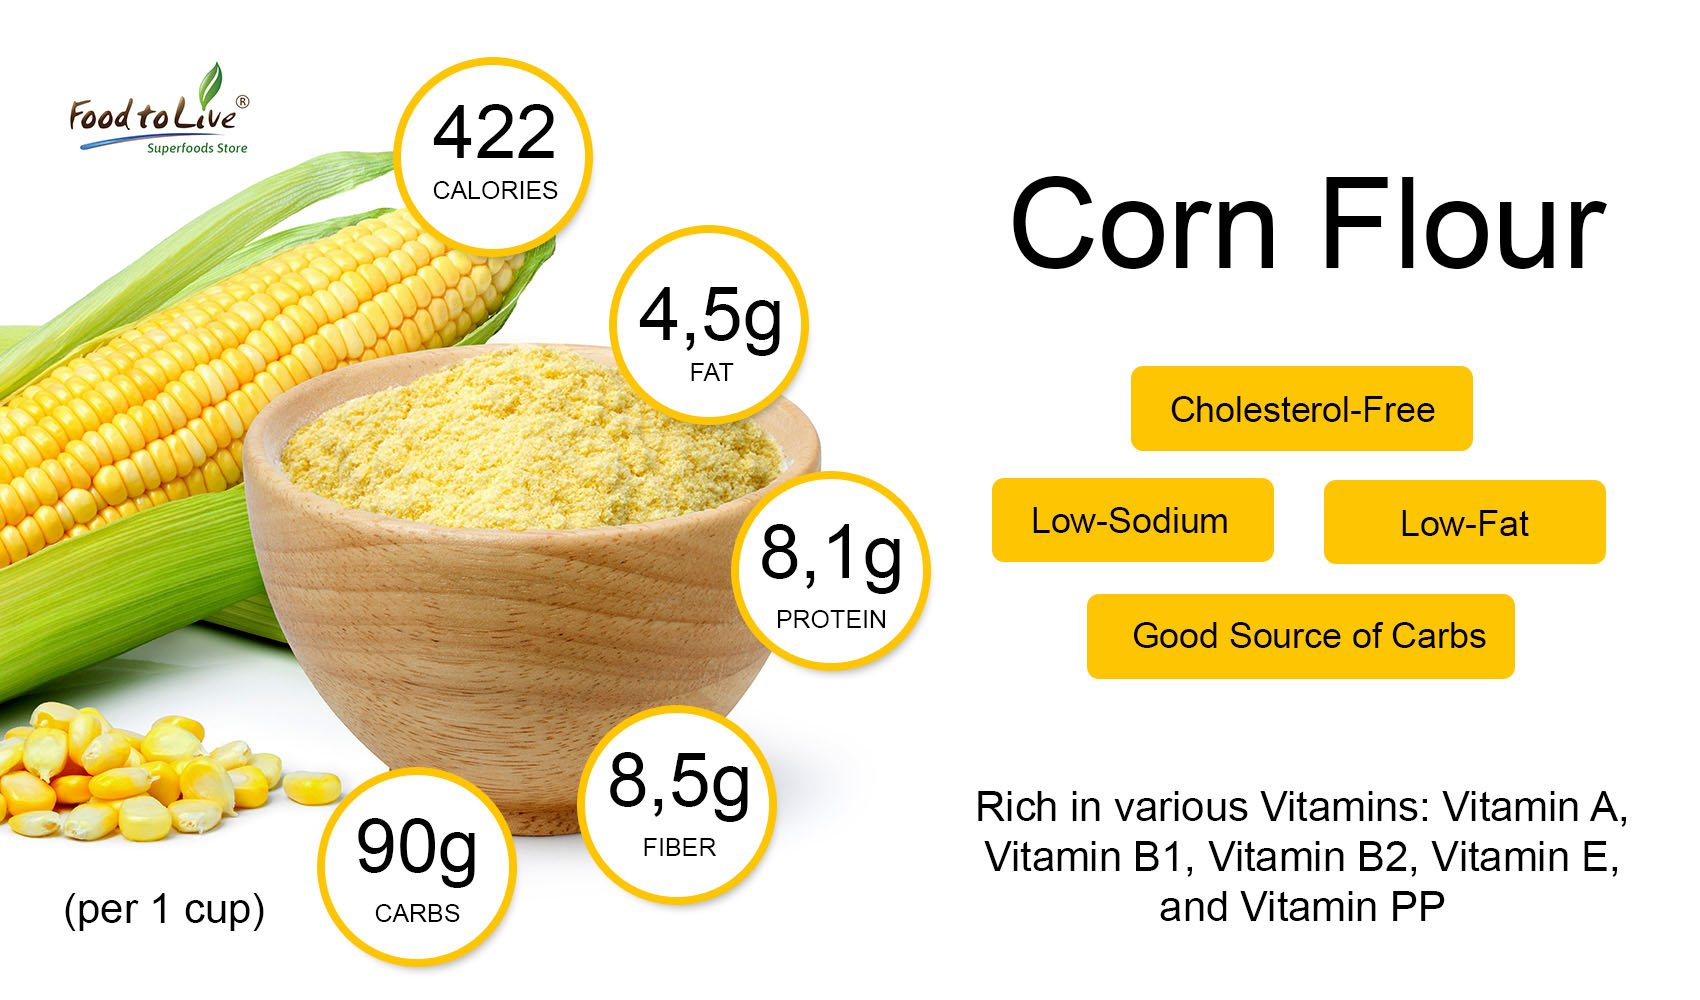 The Difference Between Cornmeal, Corn Flour and Polenta